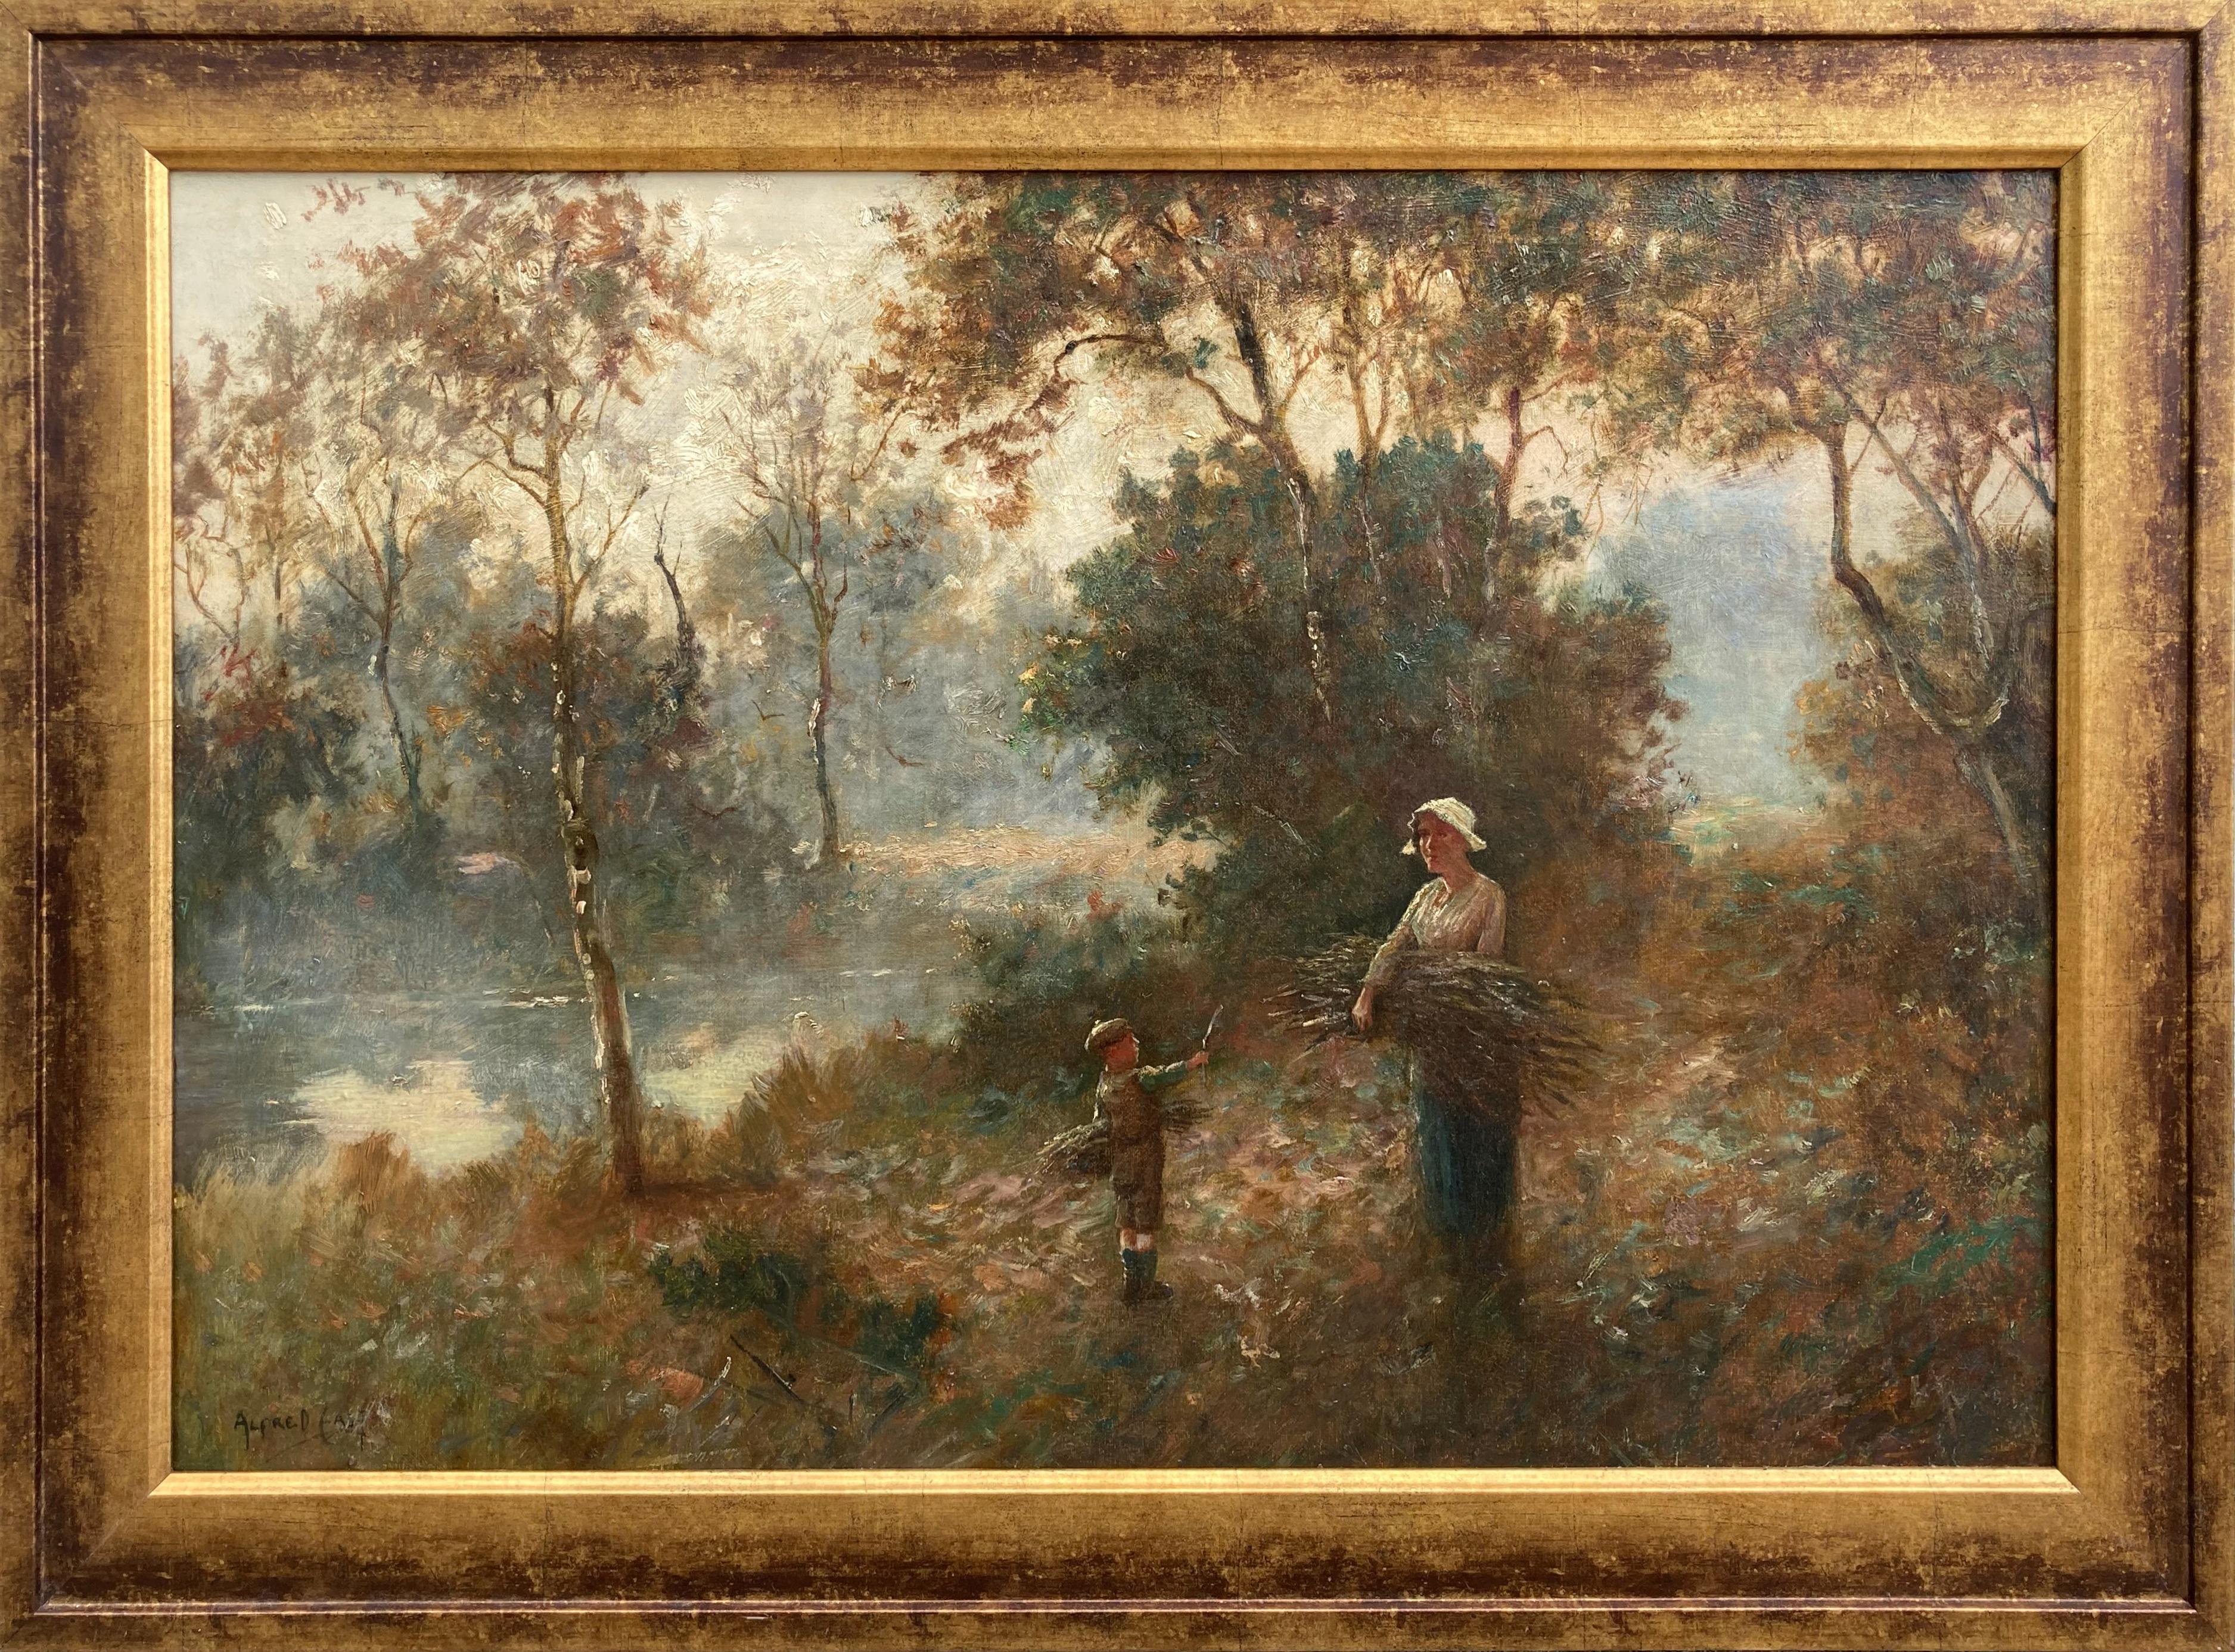 Alfred East Landscape Painting - The Kindling Gatherers, 1890 (knighted Royal Academy member, Antique Landscape)